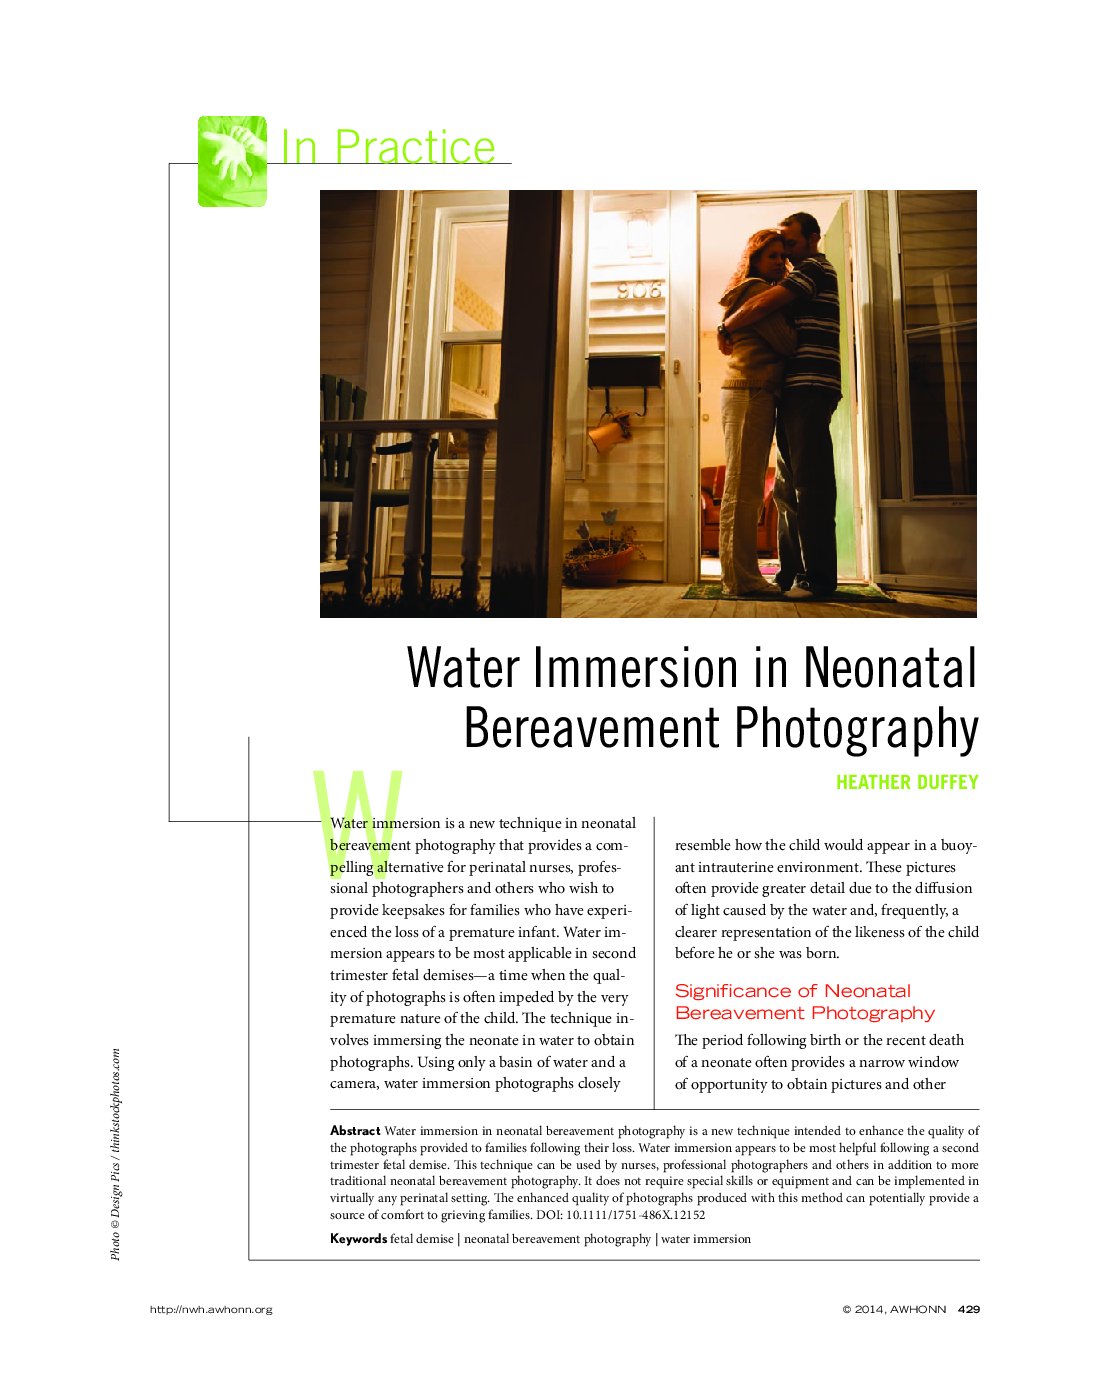 Water Immersion in Neonatal Bereavement Photography